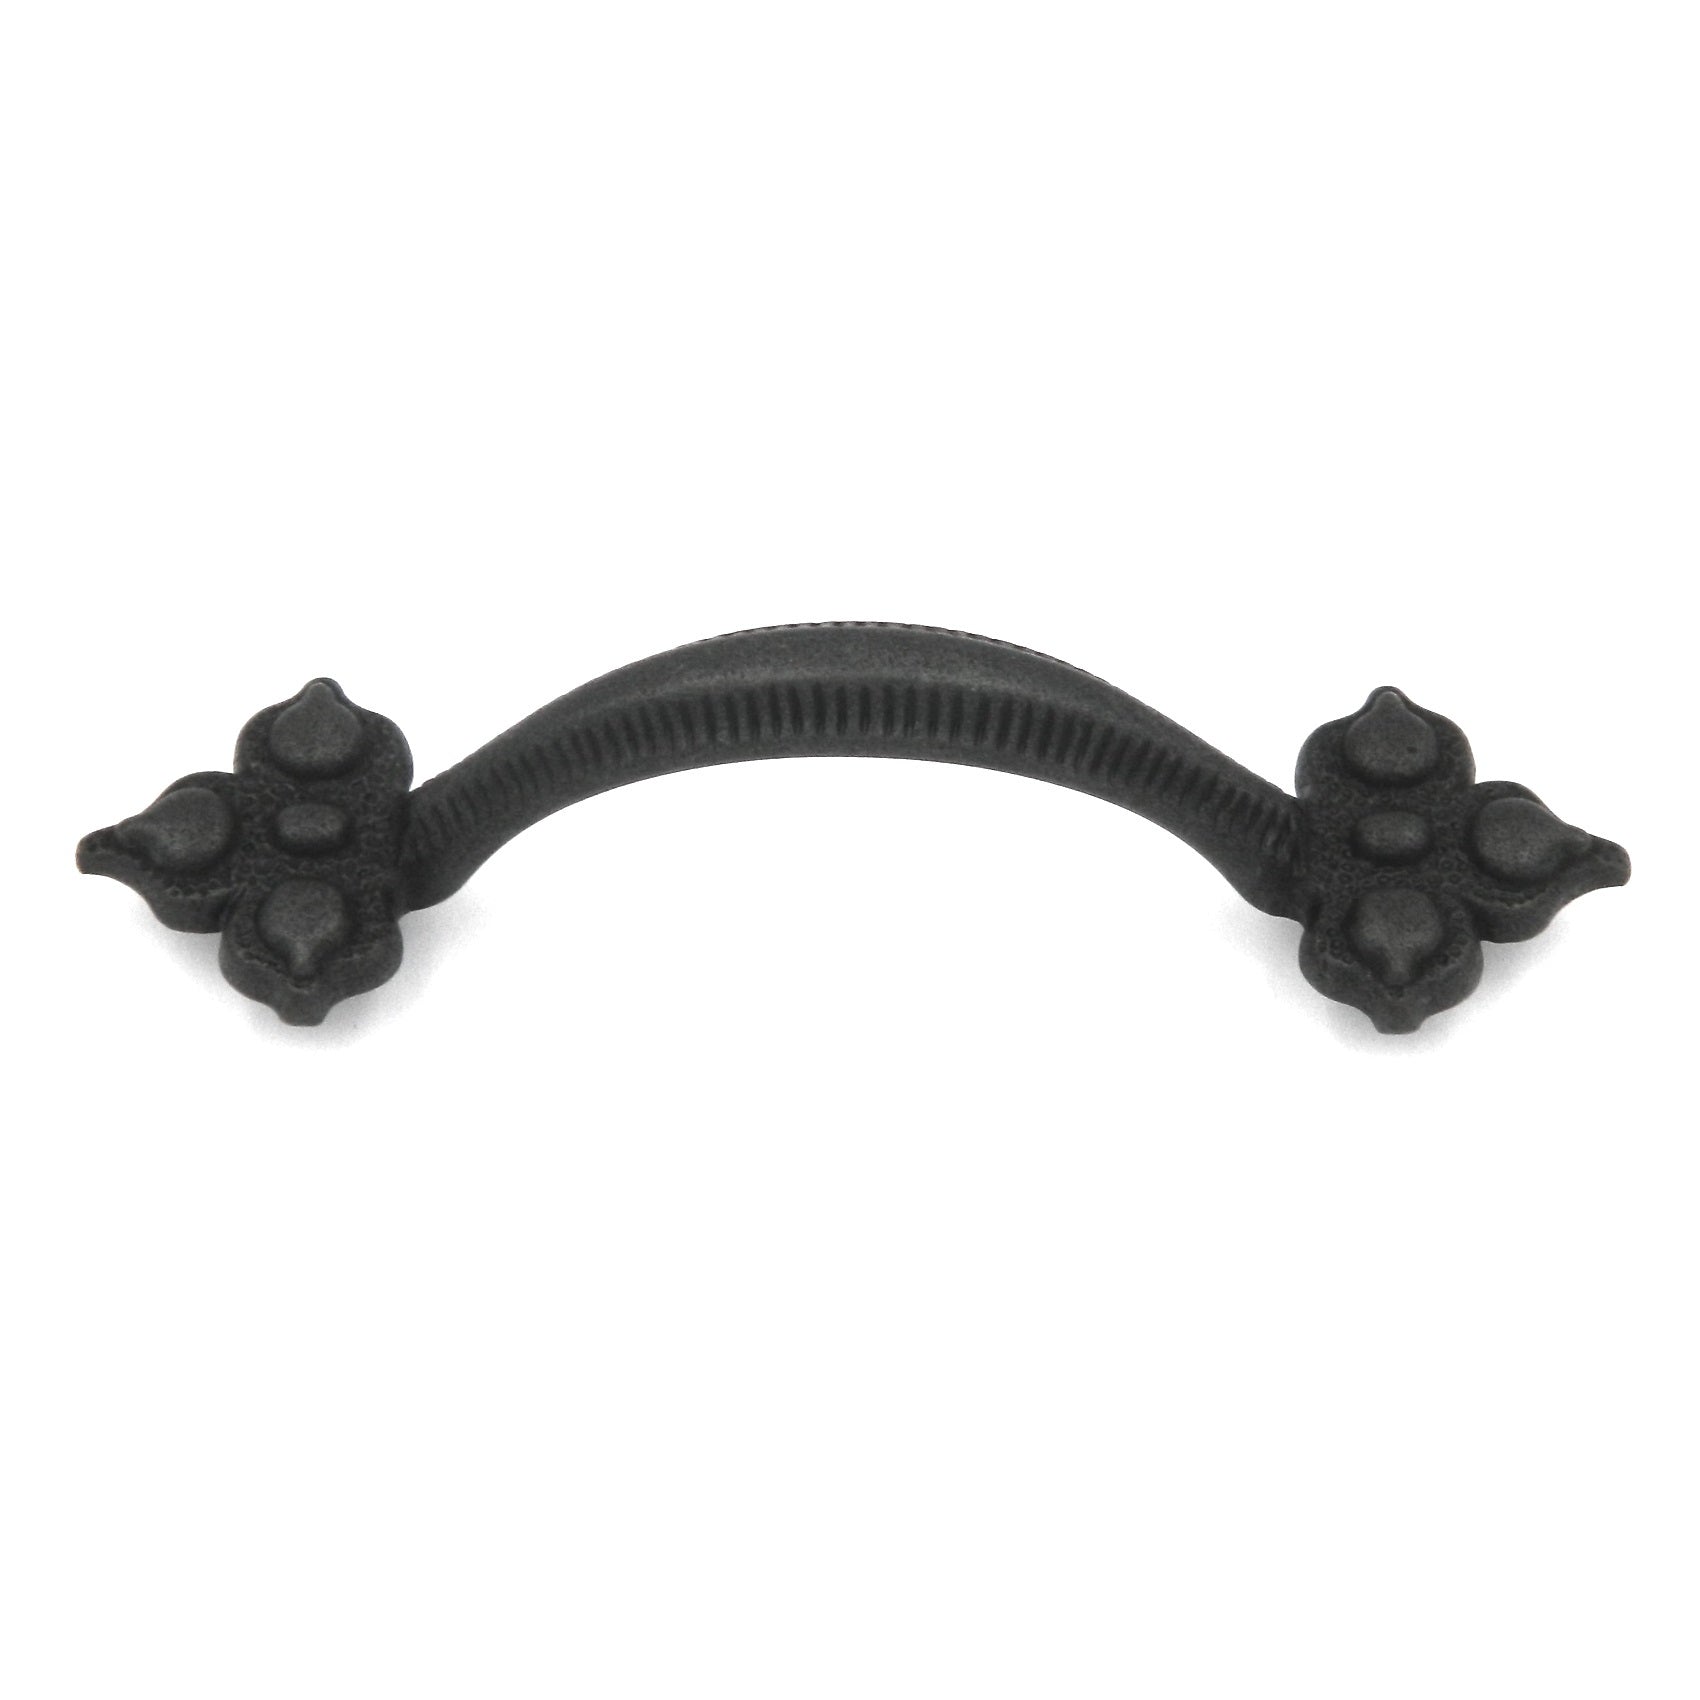 Keeler Spanish Gothic P3020-BMA Black Mist Antique 3"cc Solid Brass Cabinet Handle Pull, 10 Pack